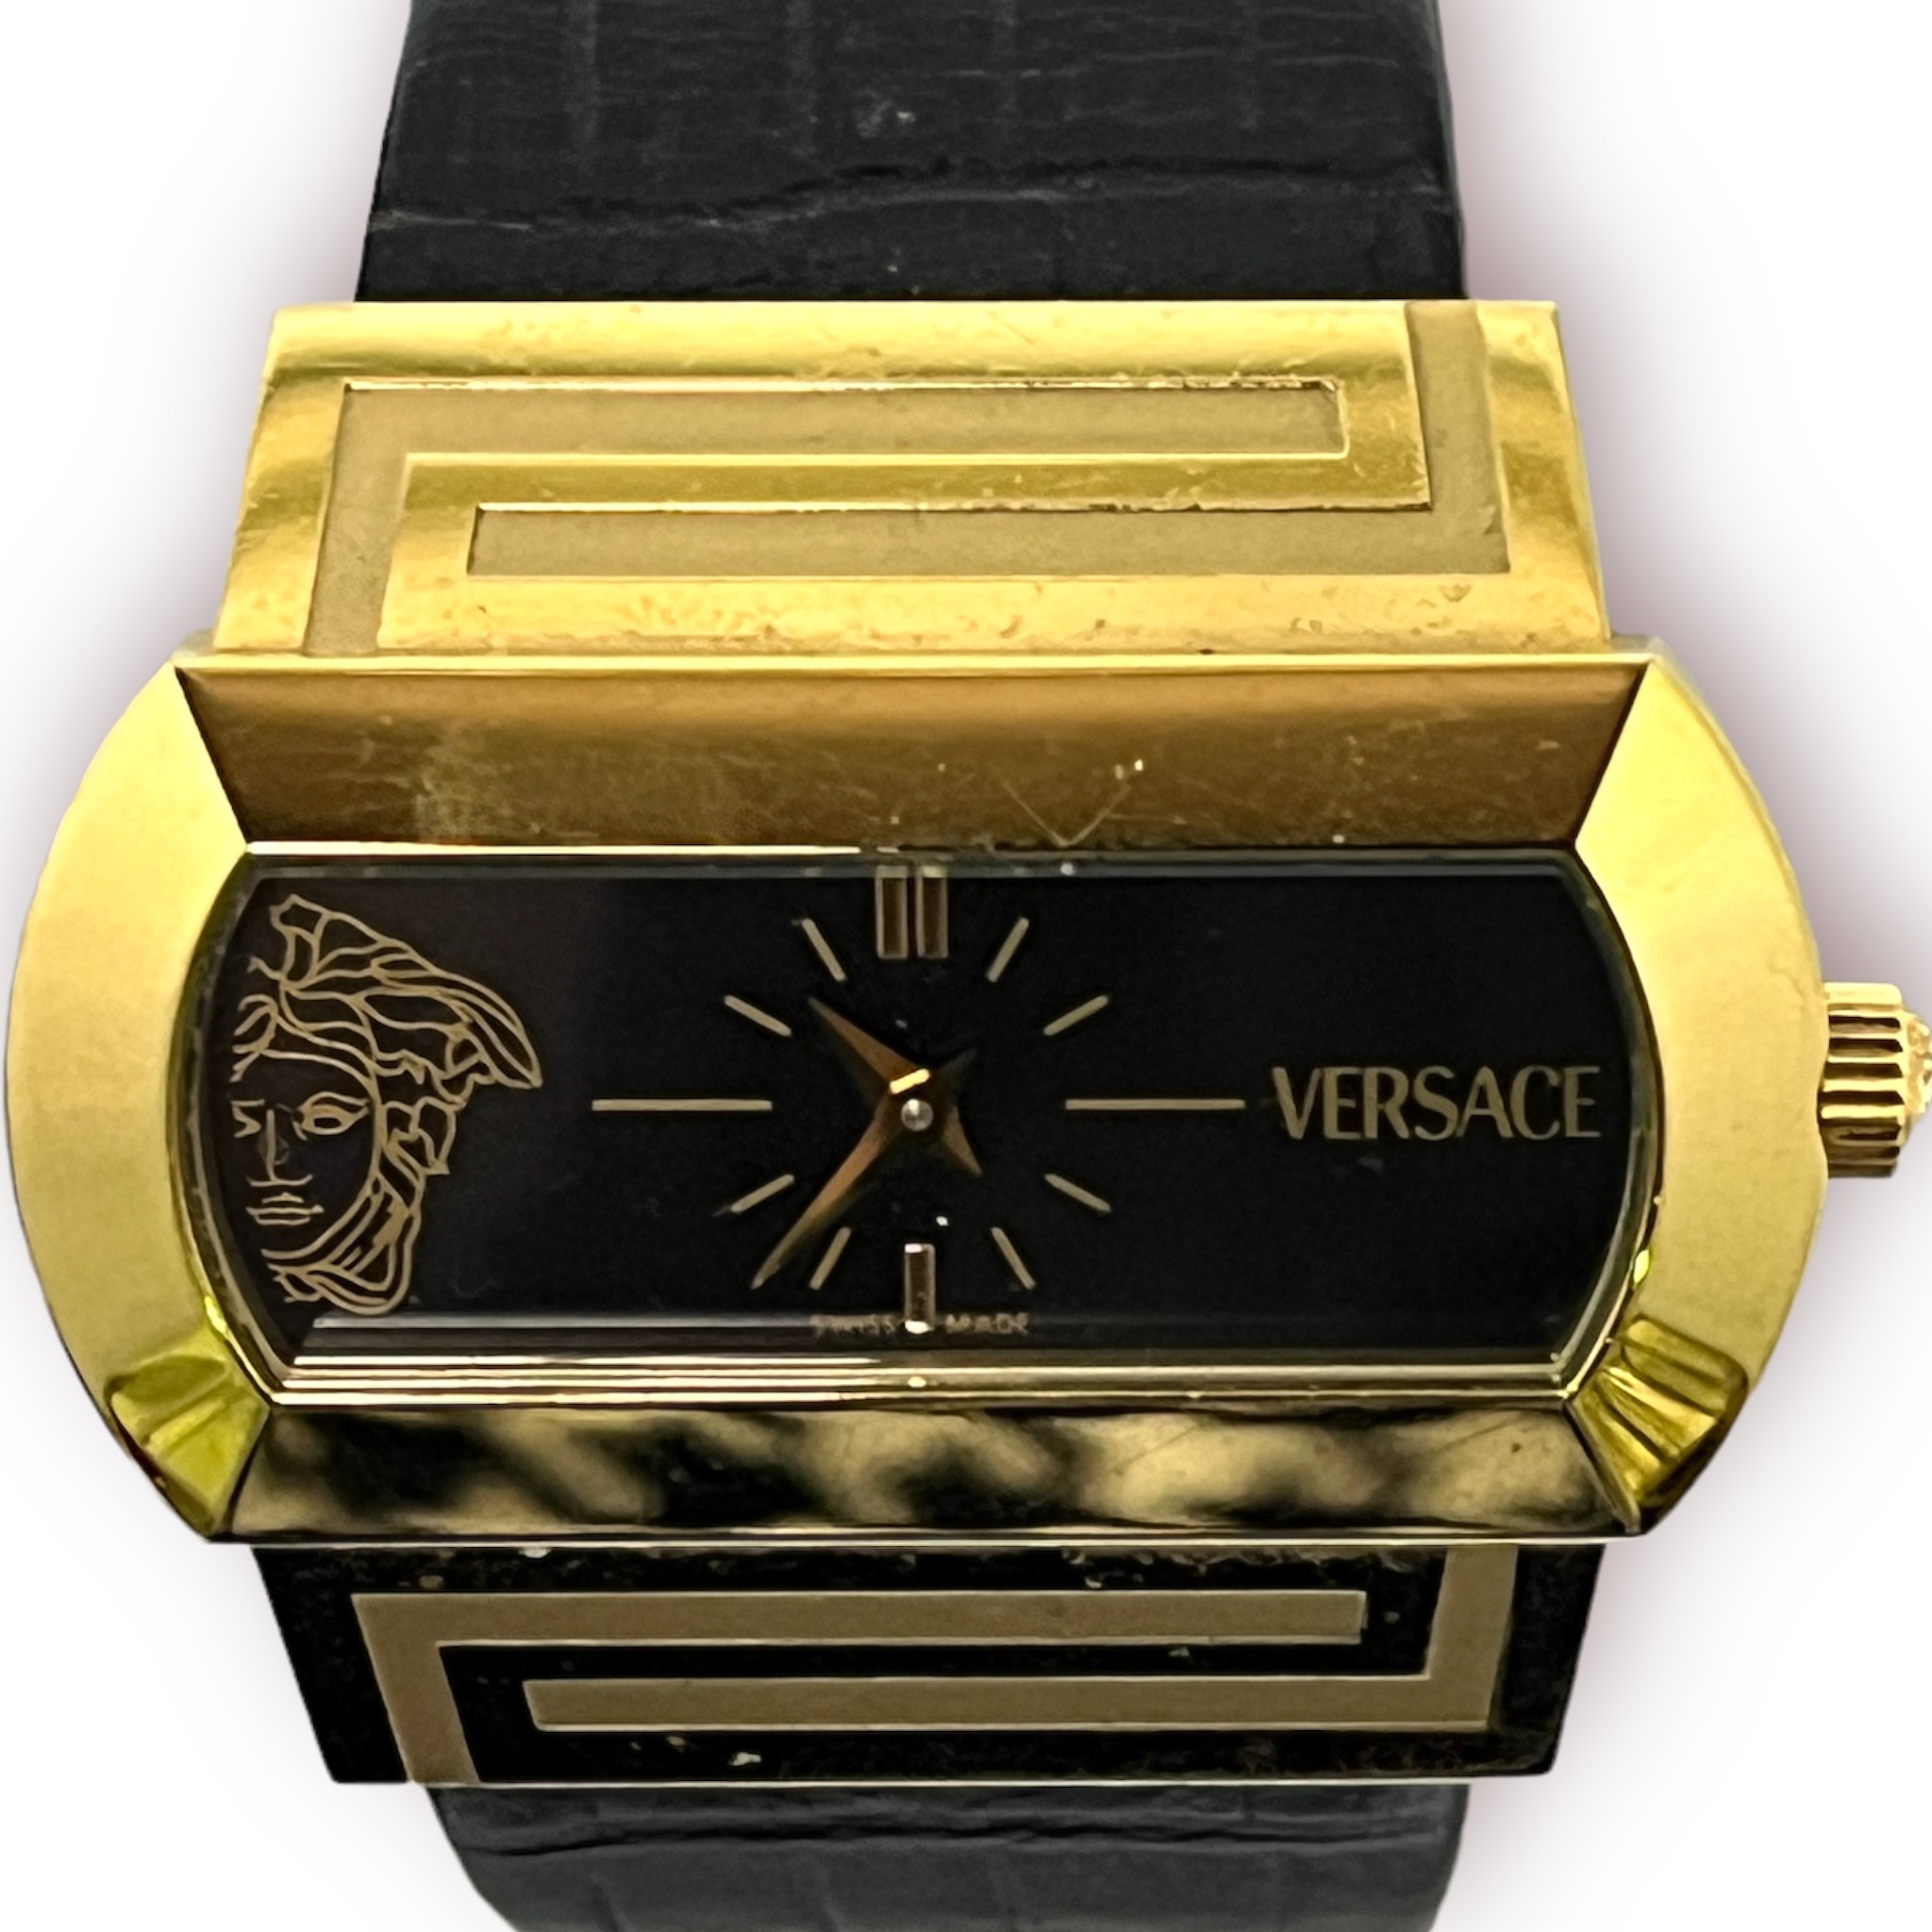 Six assorted ladies wristwatches including a gold-plated Versace example, two by Swarovski, a - Image 4 of 7